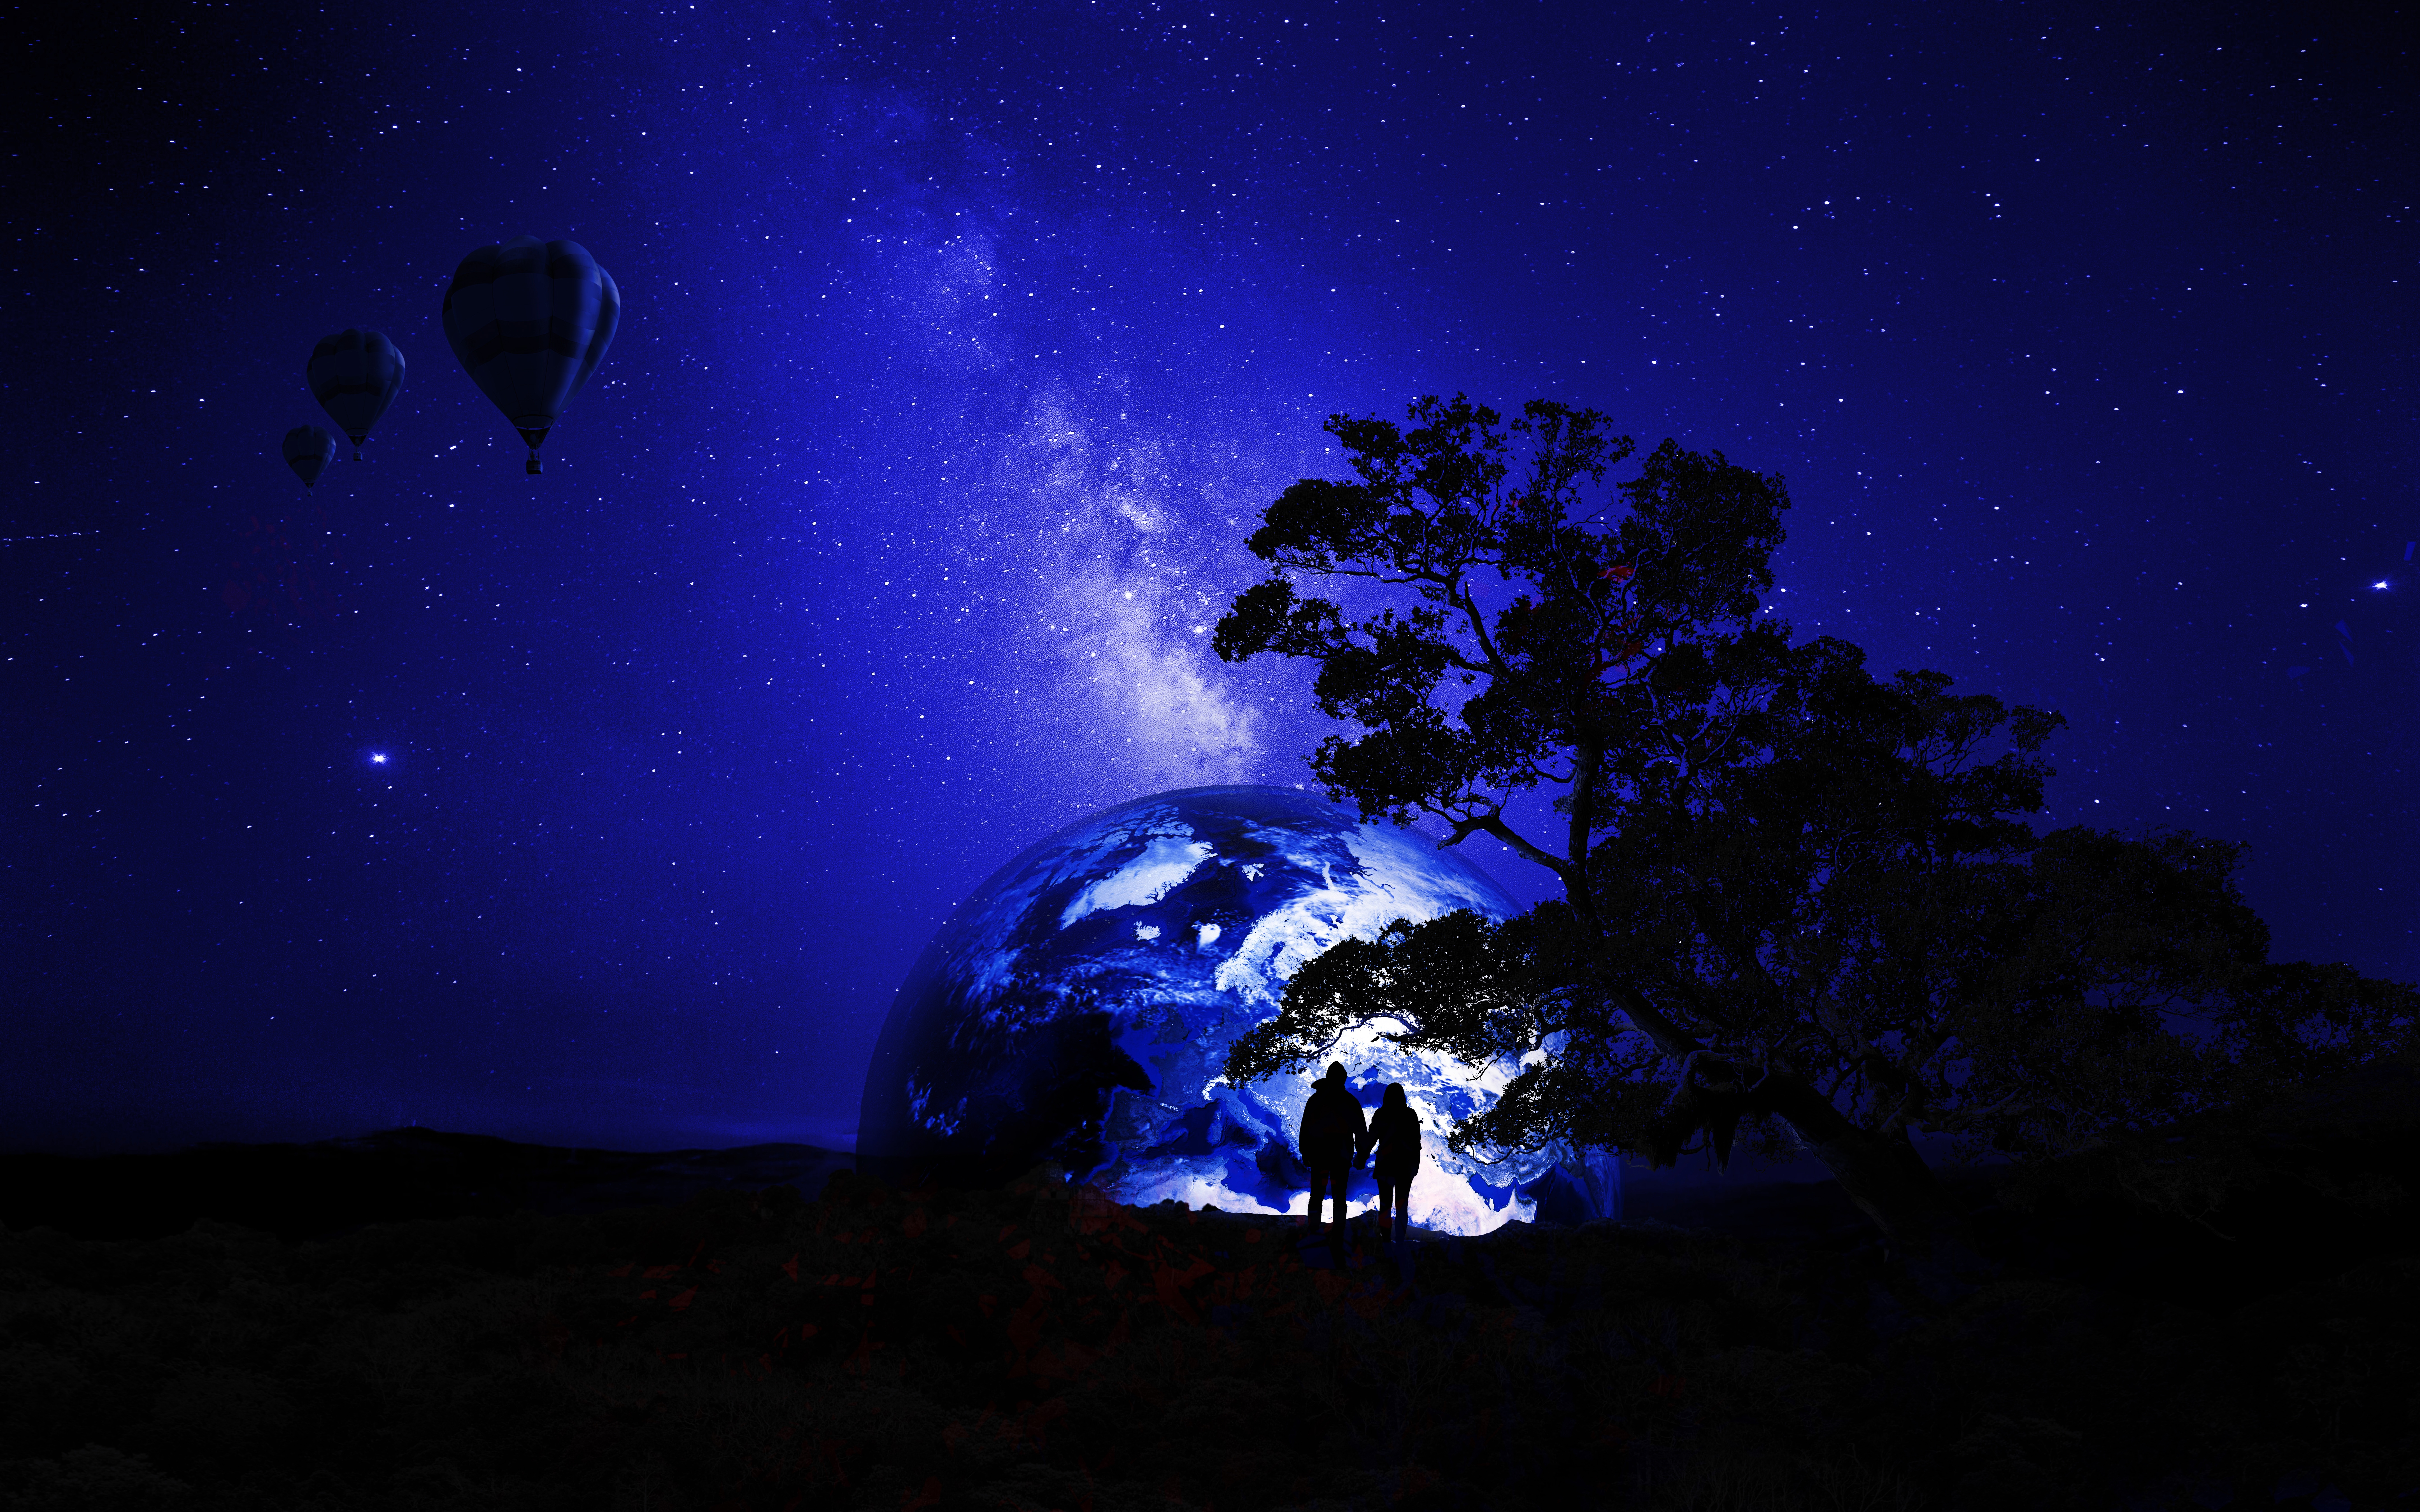 HD wallpaper, Hot Air Balloons, 5K, Together, Silhouette, Dream, Night, Couple, 8K, Earth, Starry Sky, Romantic